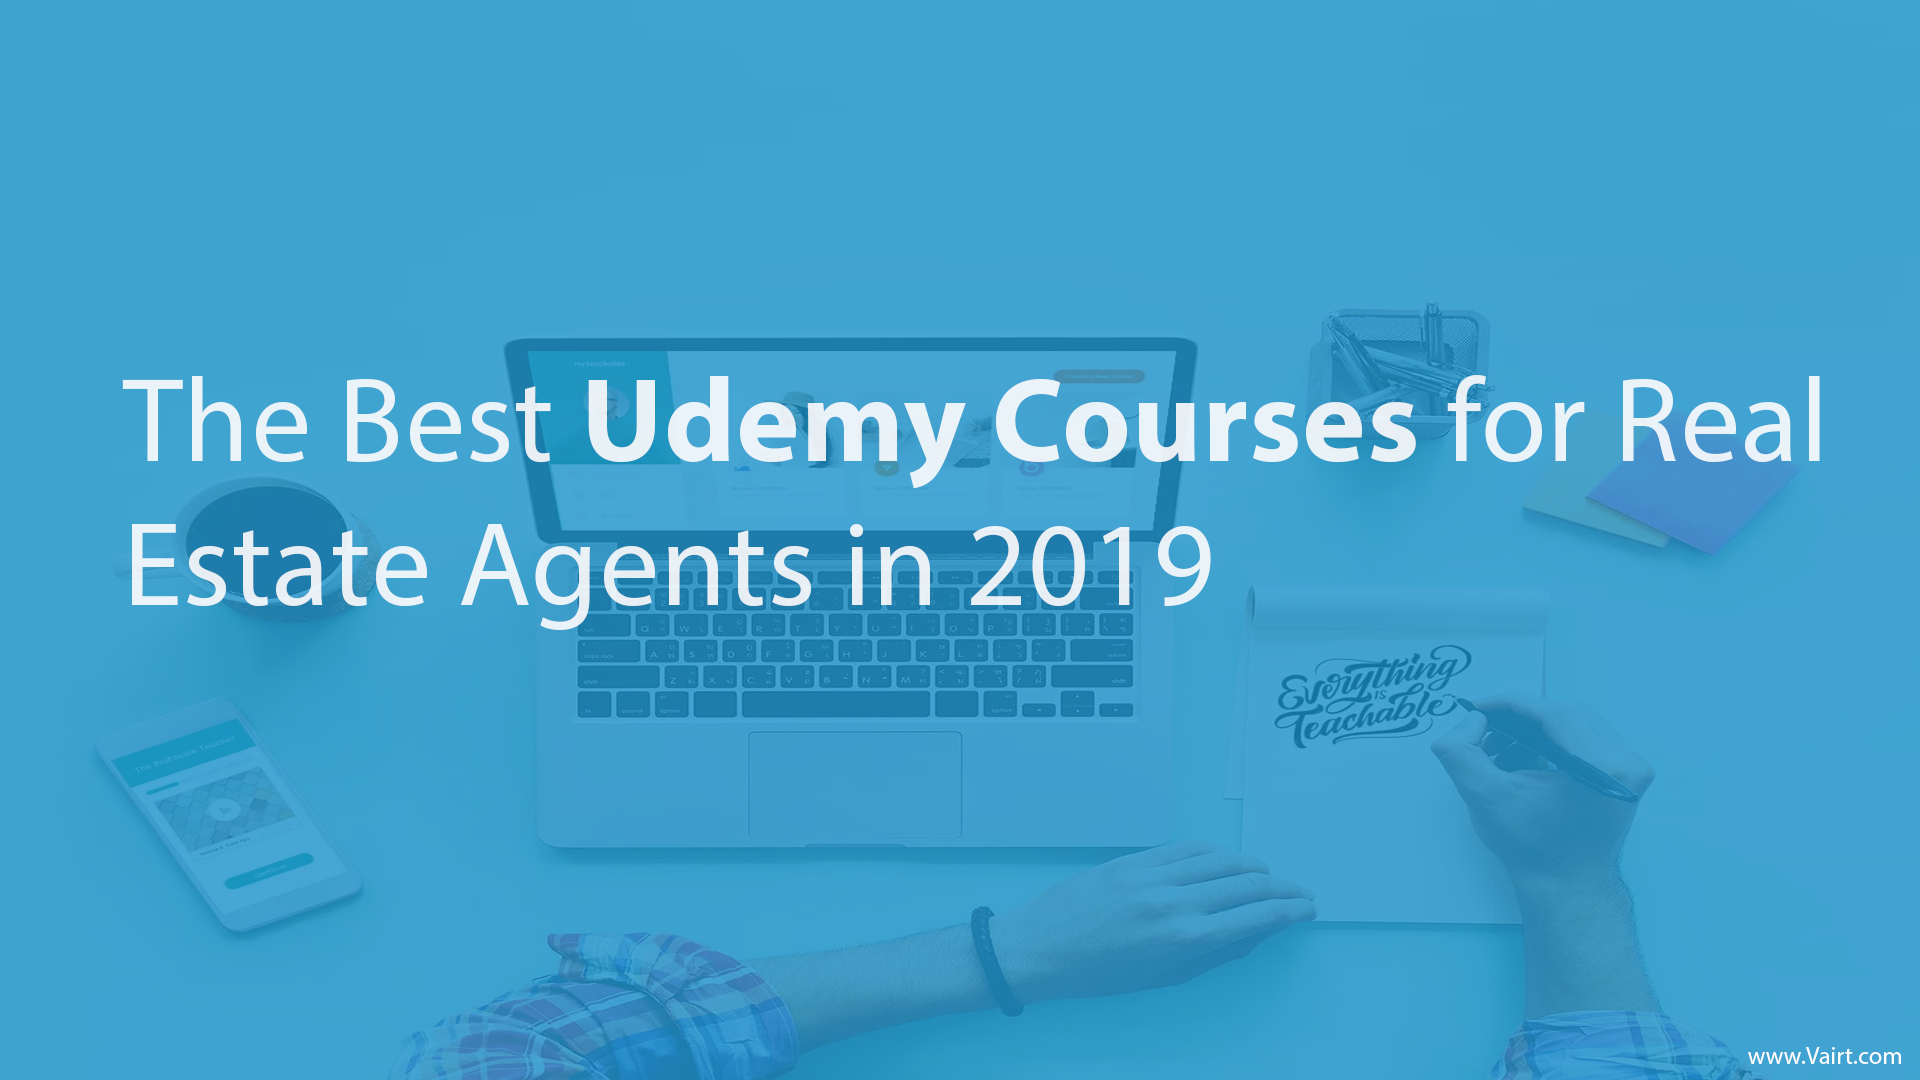 Best Udemy Courses for Real Estate Agents